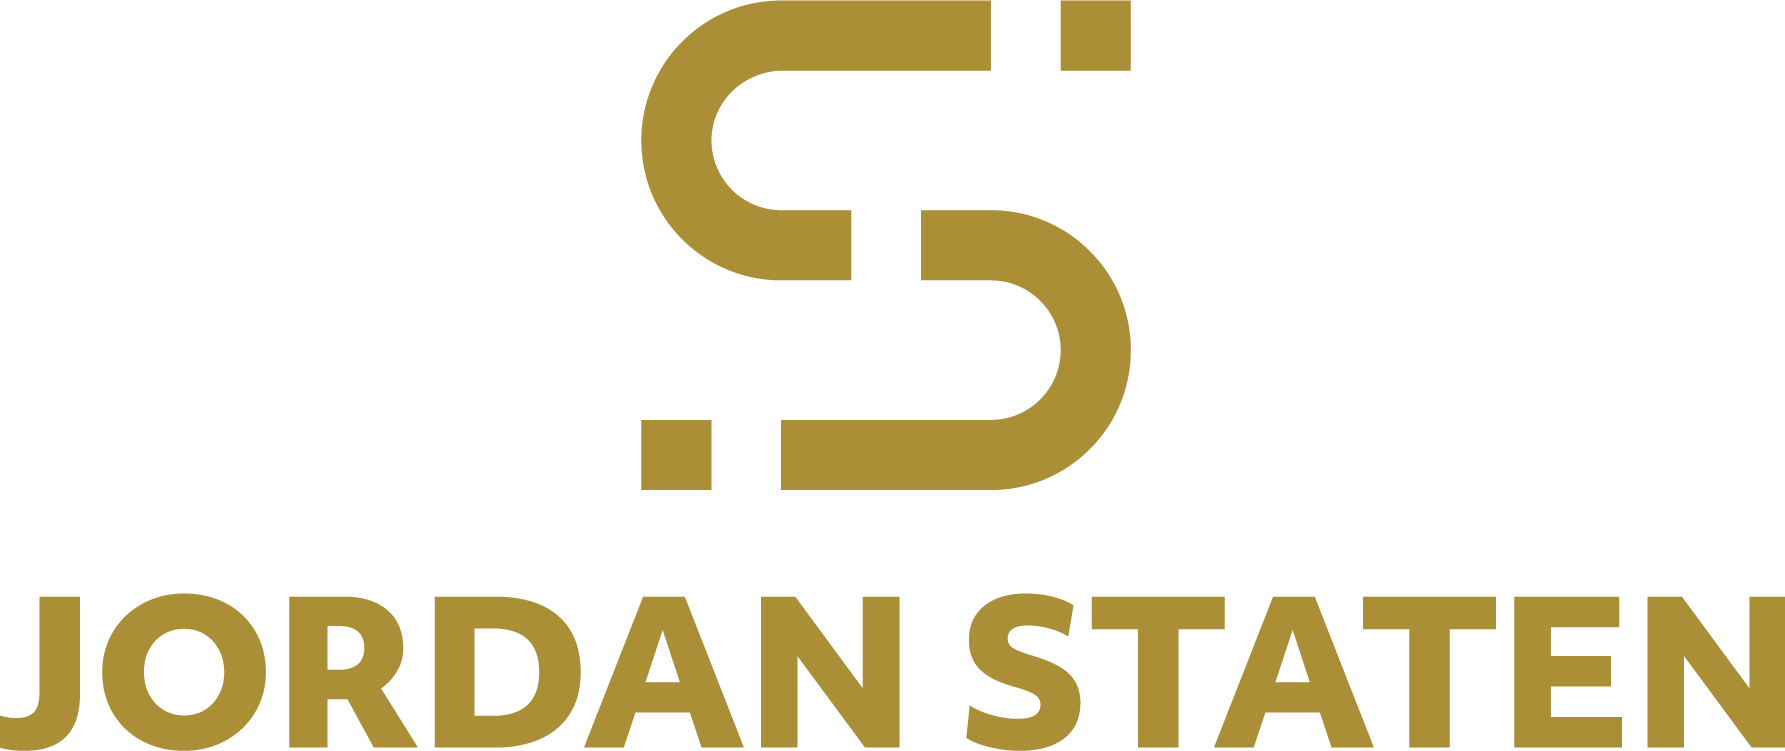 personal branding logo of Jordan Staten. A mustard yellow S formed out of two sideways lowercase Js. Underneath is Jordan Staten in all caps, also in mustard yellow.